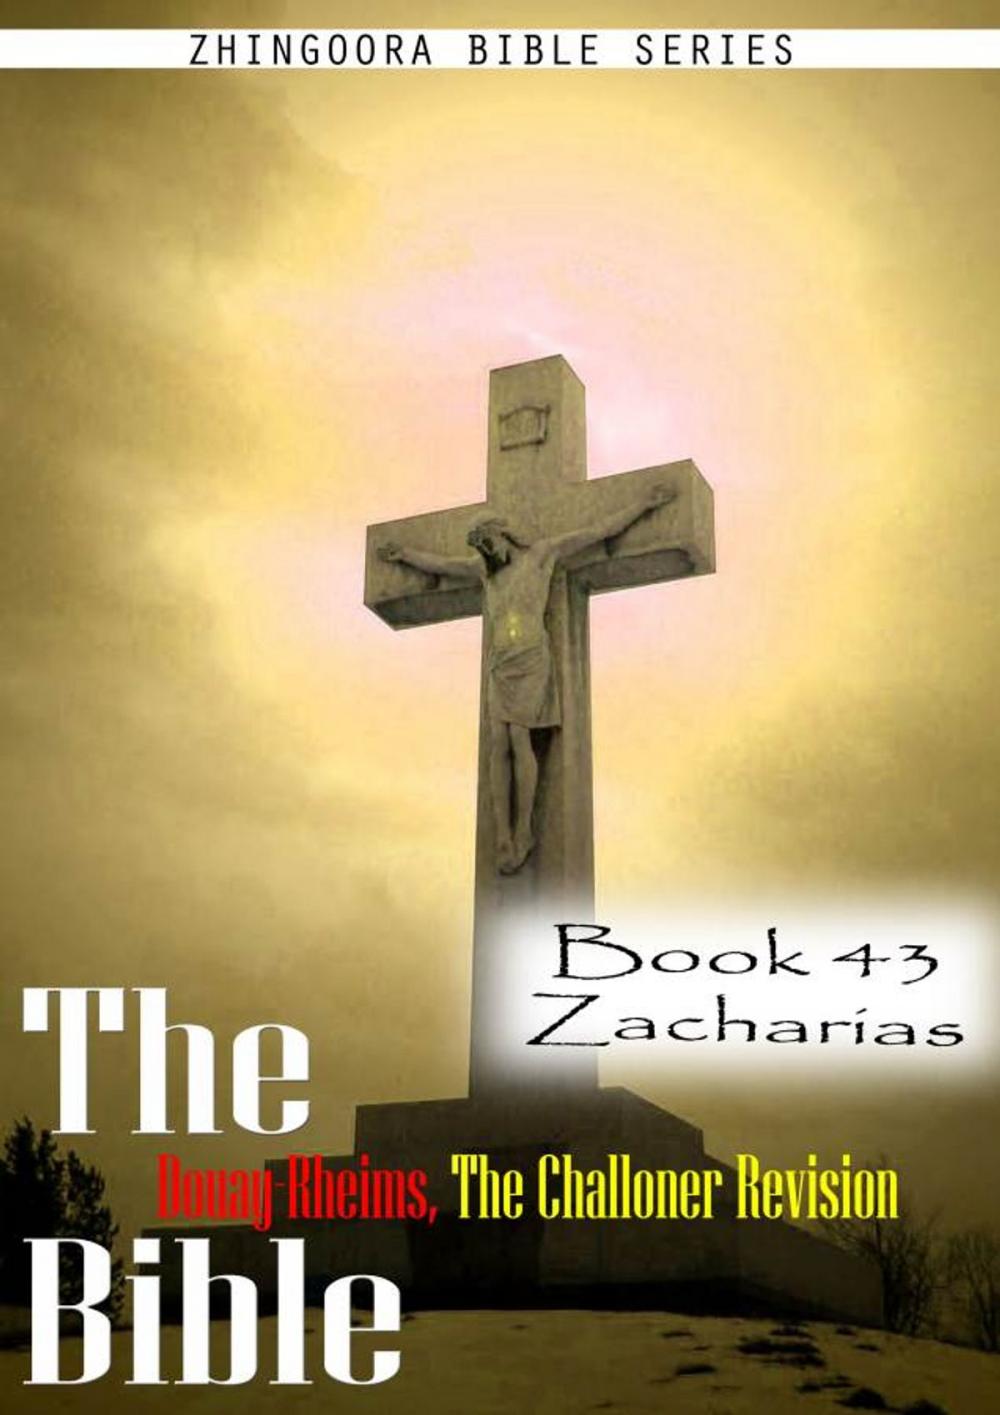 Big bigCover of The Bible Douay-Rheims, the Challoner Revision,Book 43 Zacharias